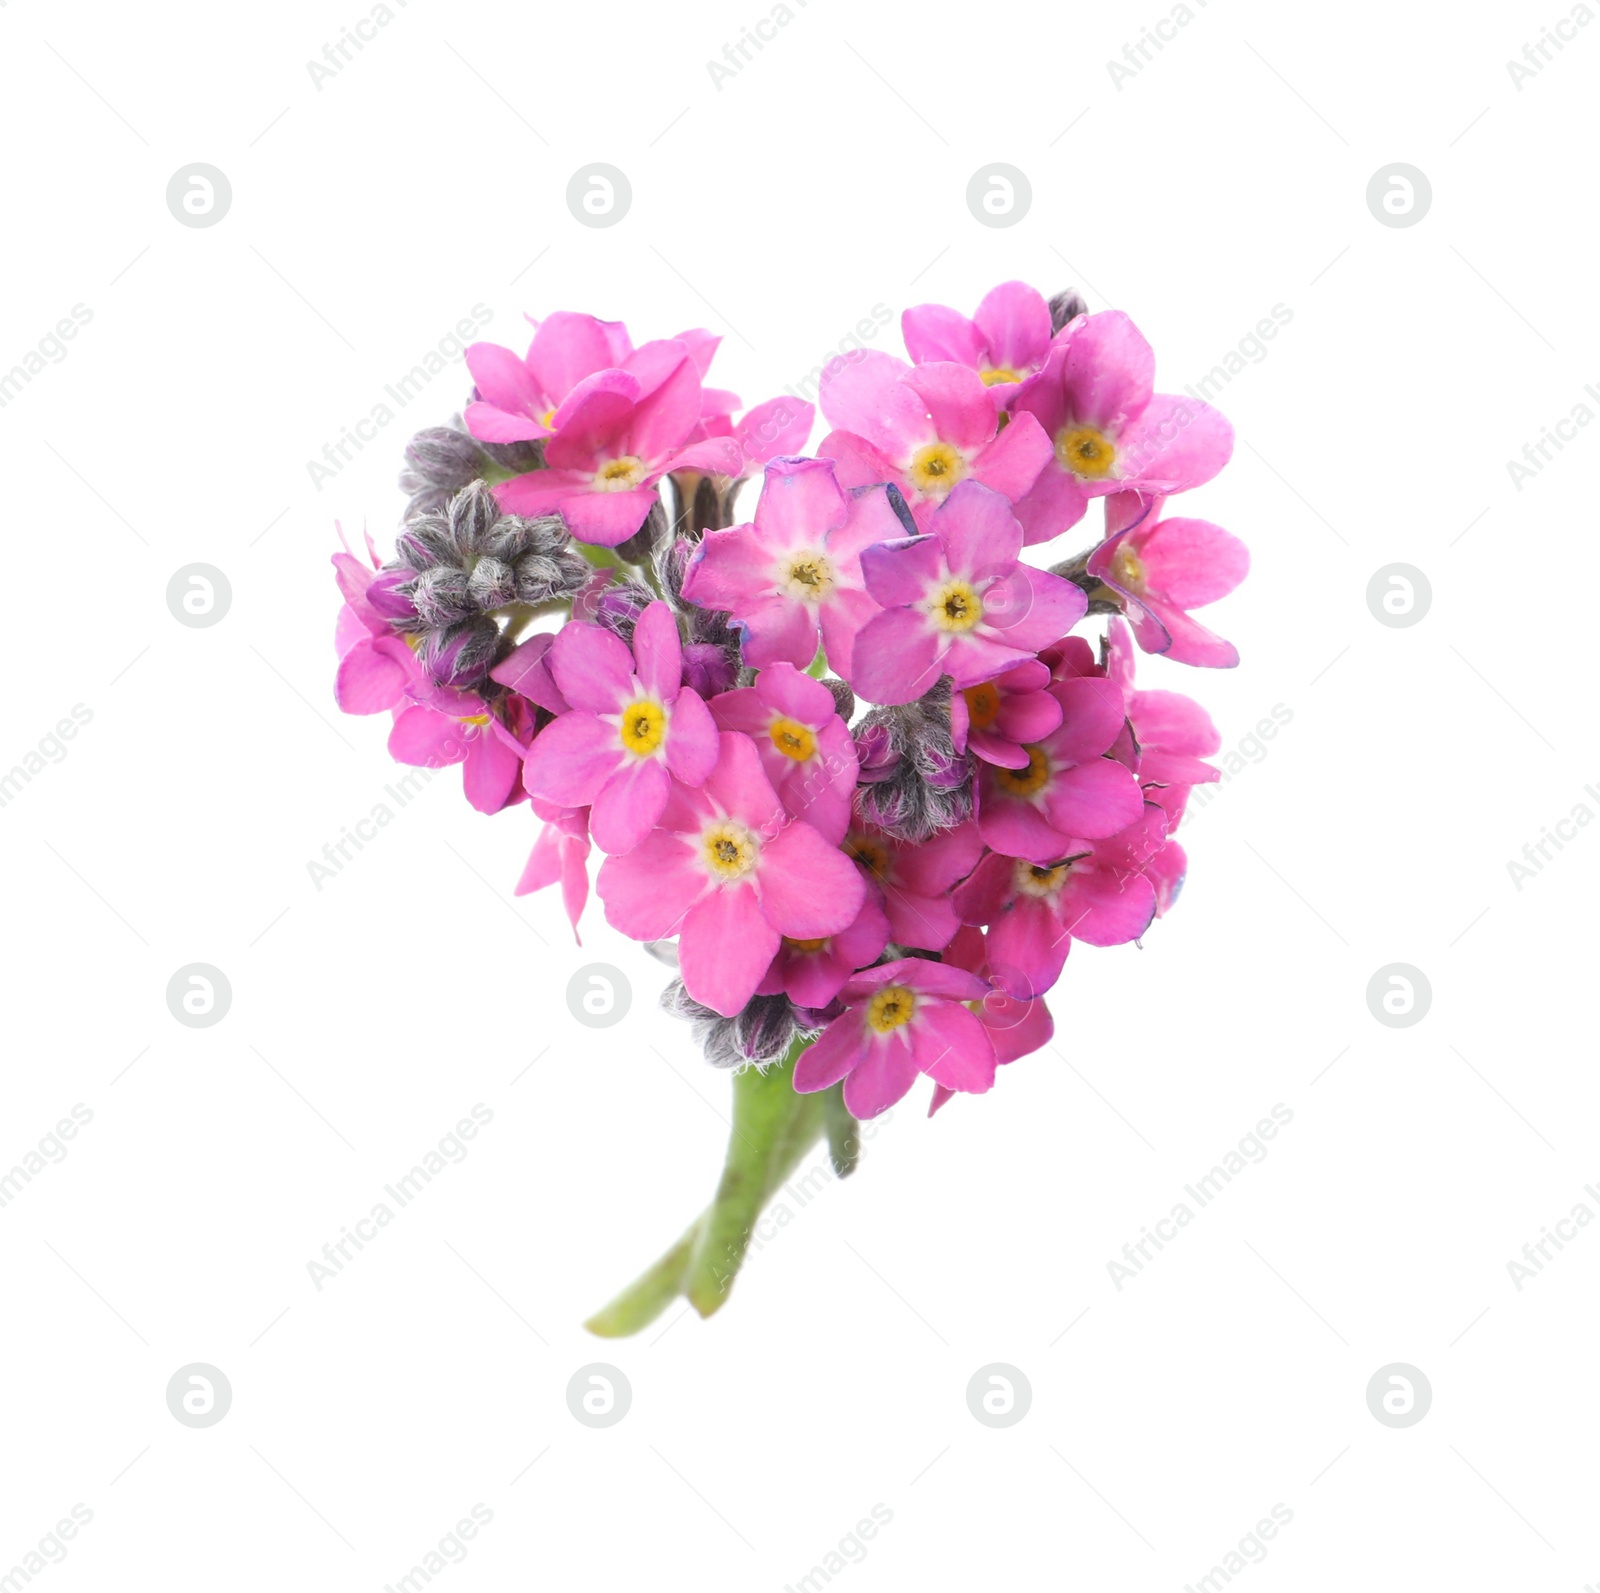 Photo of Heart made with beautiful Forget-me-not flowers isolated on white